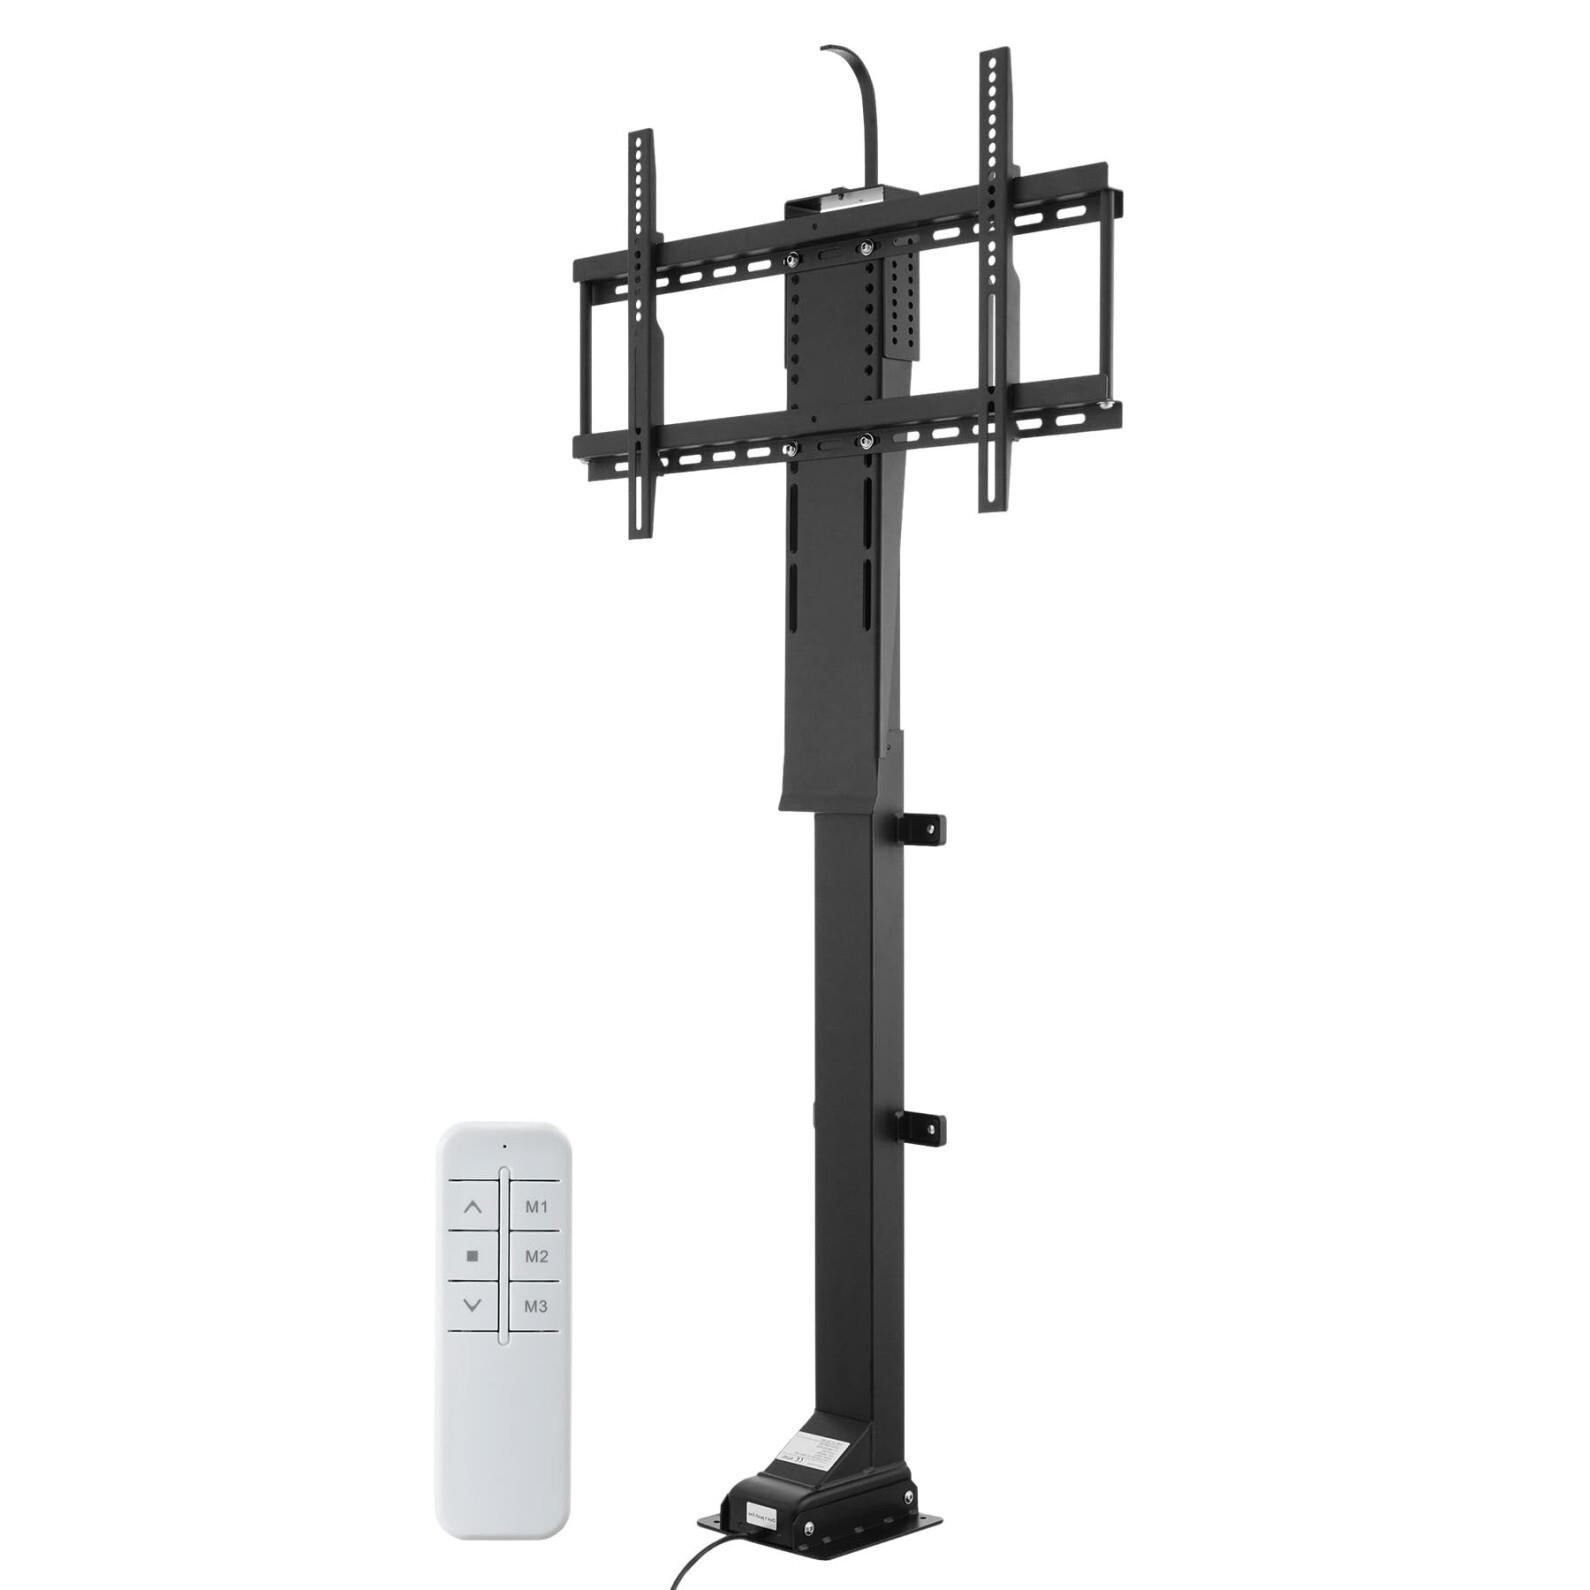 CO-Z Motorized TV Lift for 32" to 70" TVs up to 60